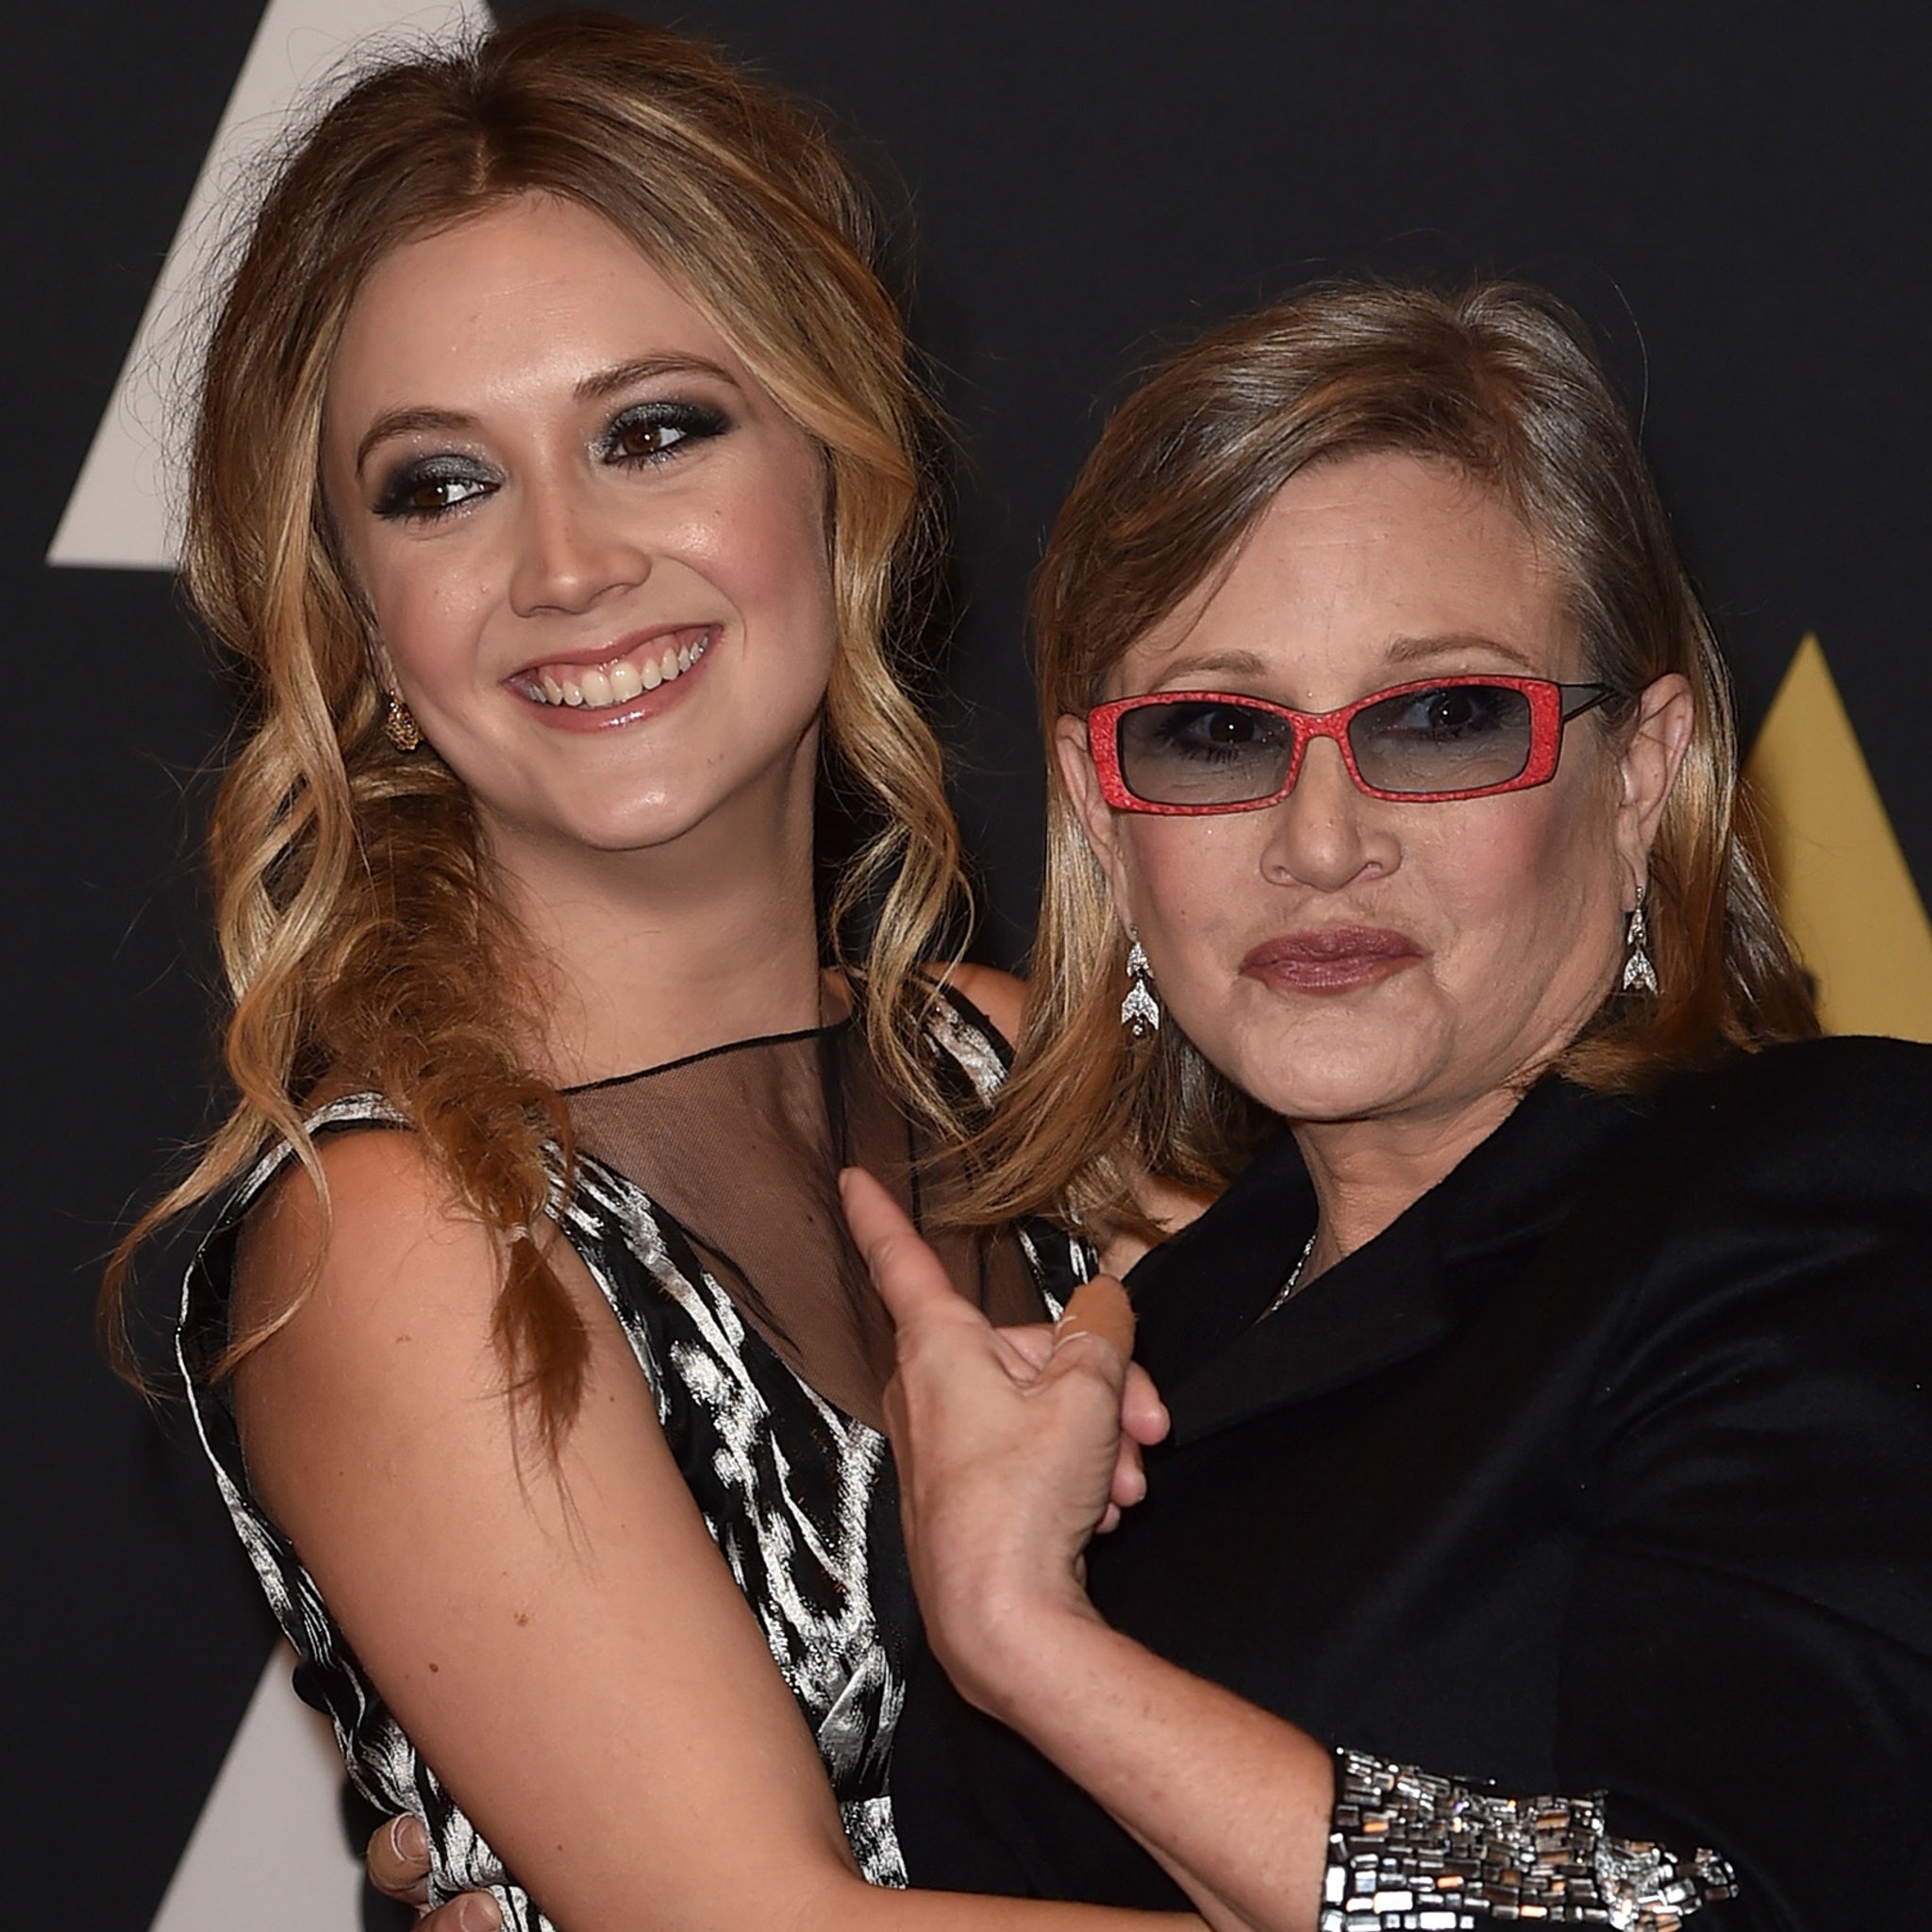 Billie Lourd's Scream Queens Look Was an Homage to Mom Carrie Fisher